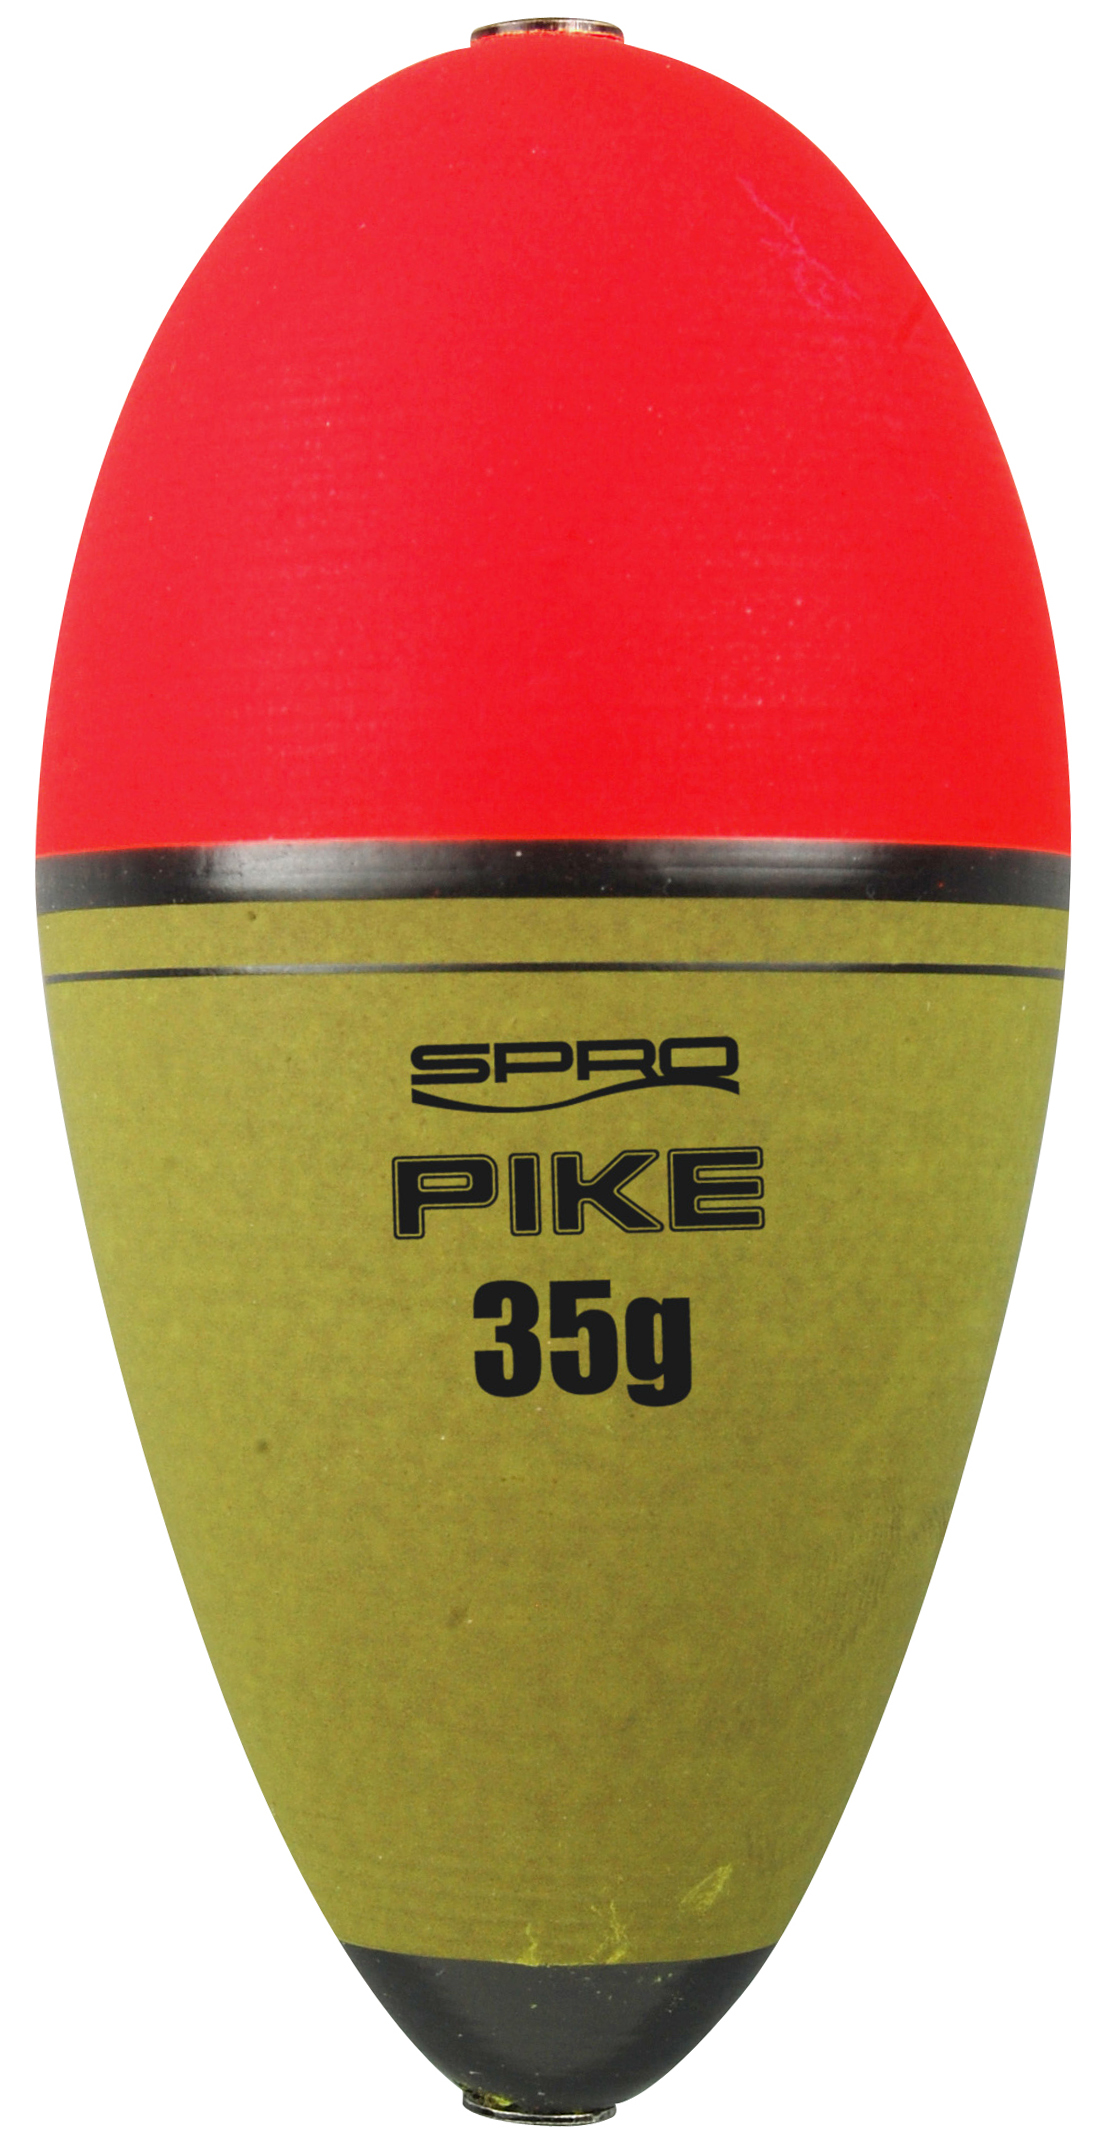 Spro Pike Oval Floats from Predator Tackle